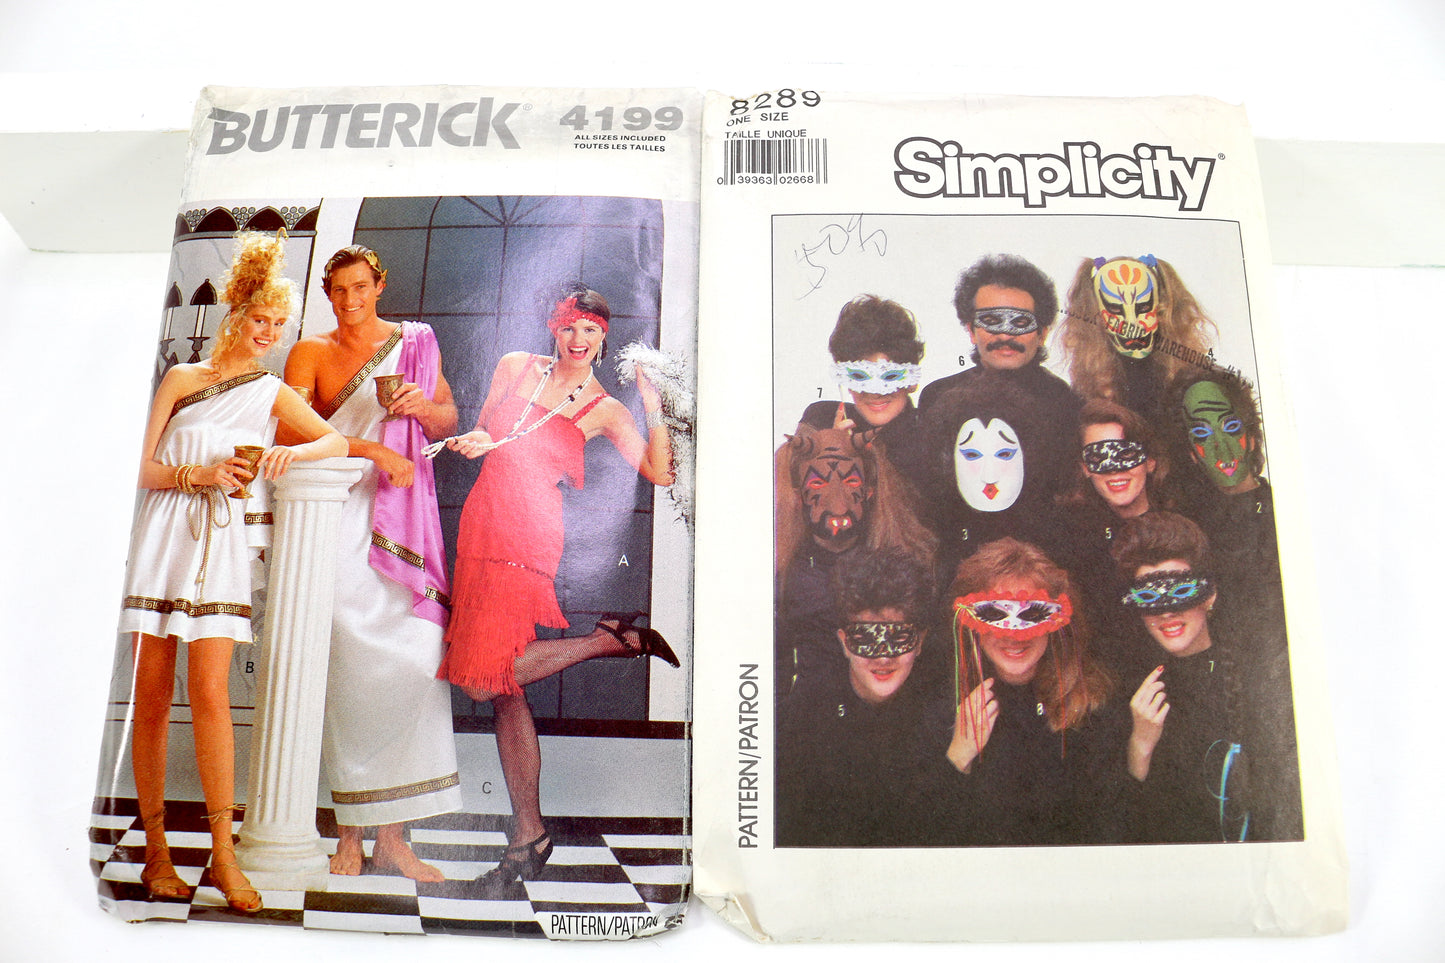 Butterick 4199 Adult Costume Sewing Pattern or Simplicity 8289 Masks Sewing Pattern